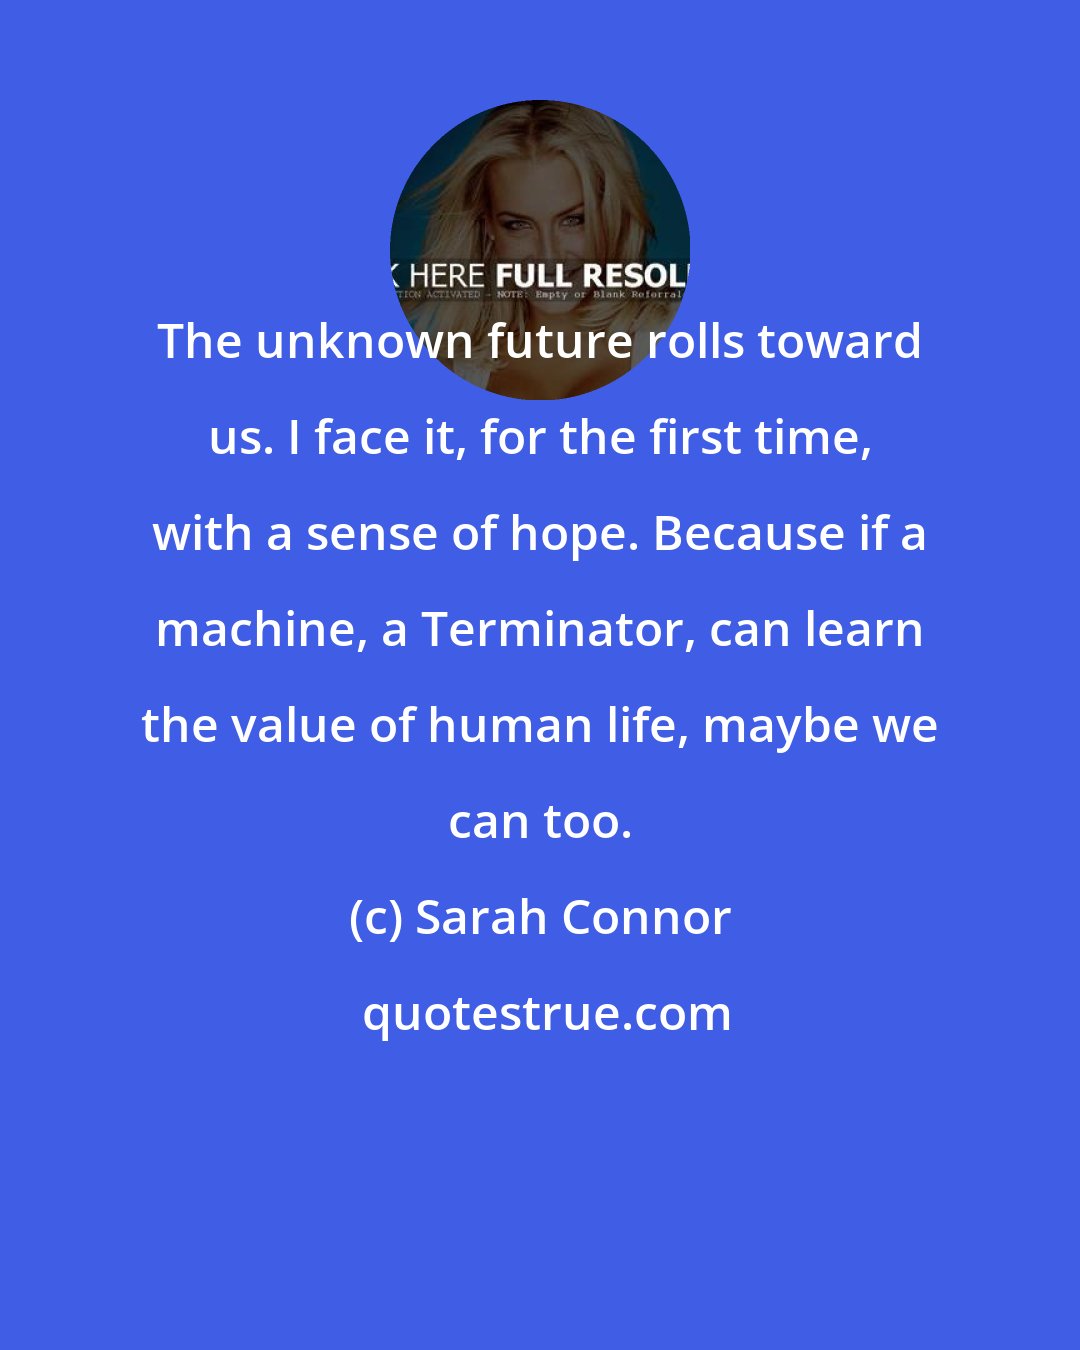 Sarah Connor: The unknown future rolls toward us. I face it, for the first time, with a sense of hope. Because if a machine, a Terminator, can learn the value of human life, maybe we can too.